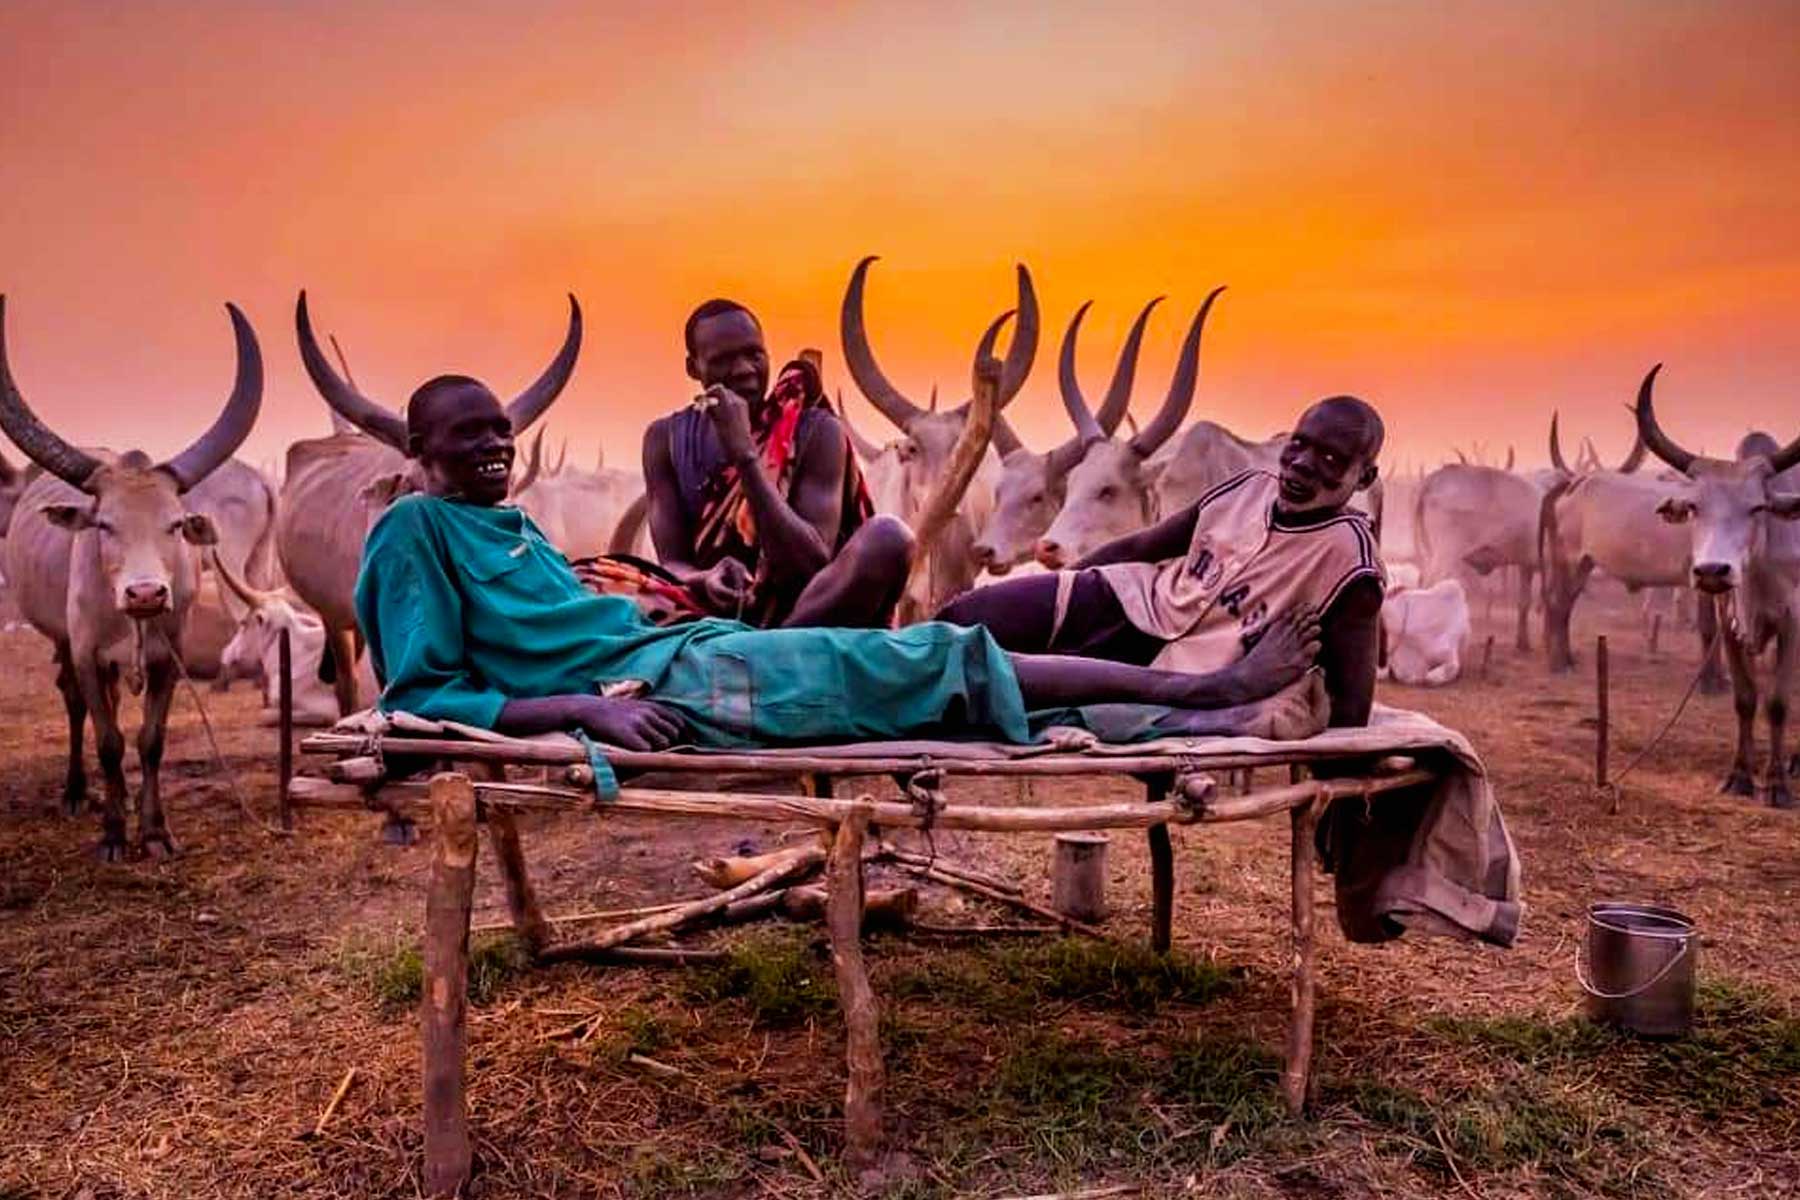 explore-the-uncharted-beauty-of-south-sudan-with-one-more-adventure-safaris